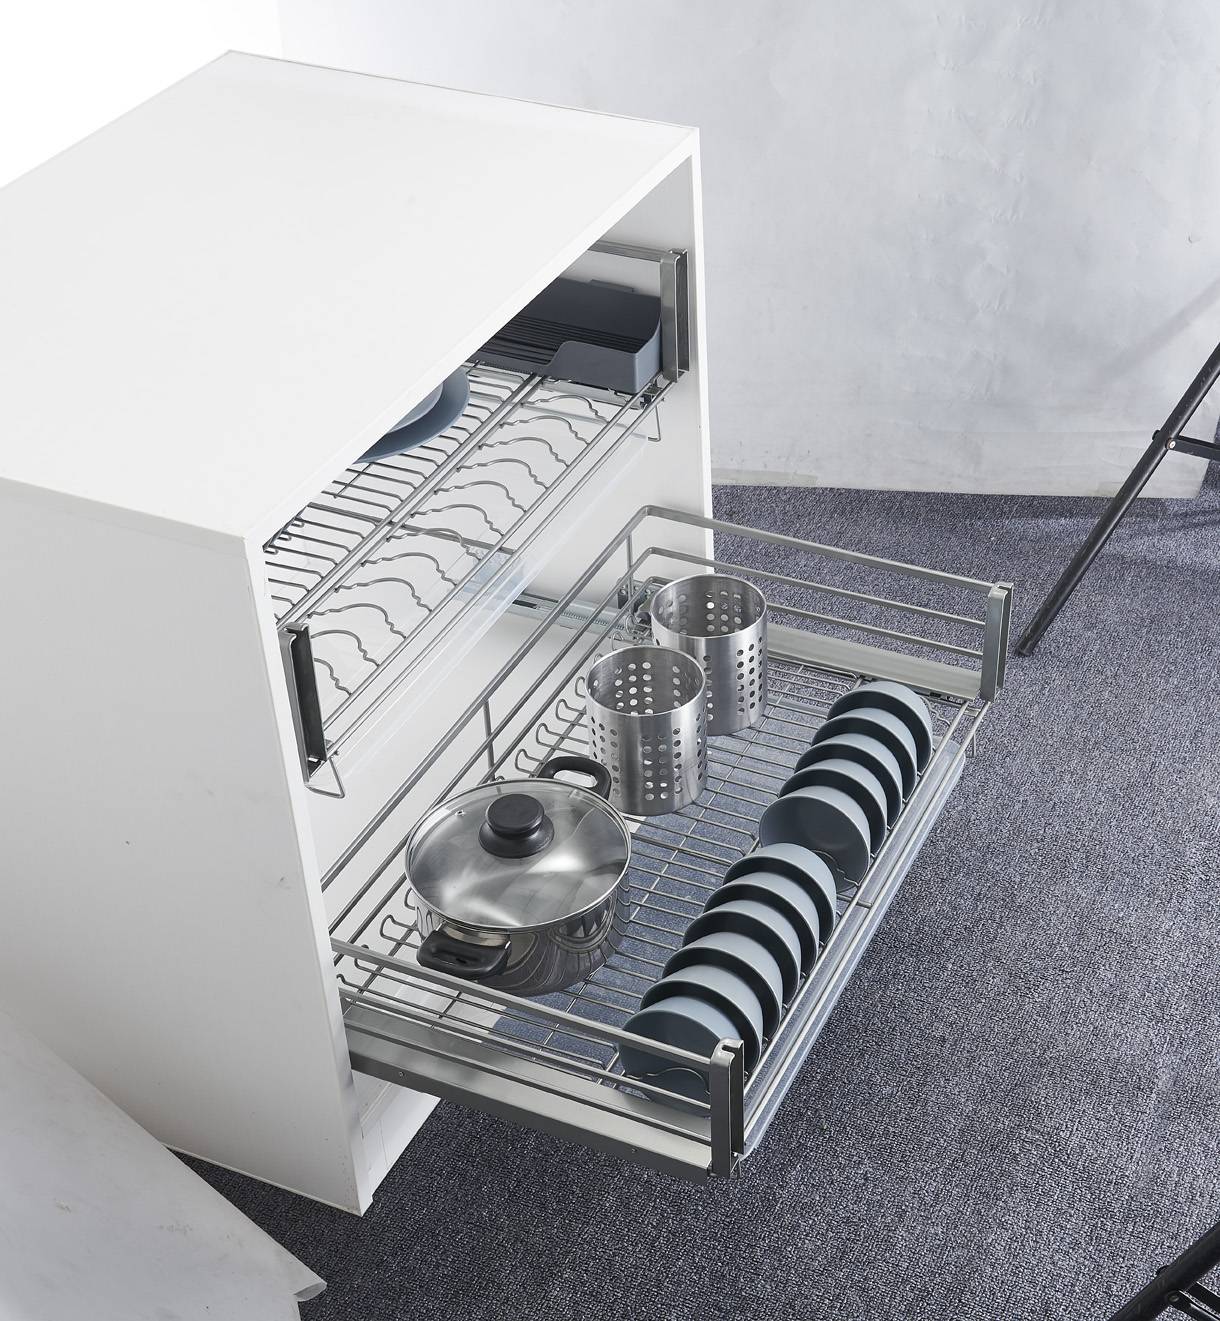 The Ultimate Guide to Choosing the Best Modular Kitchen Baskets